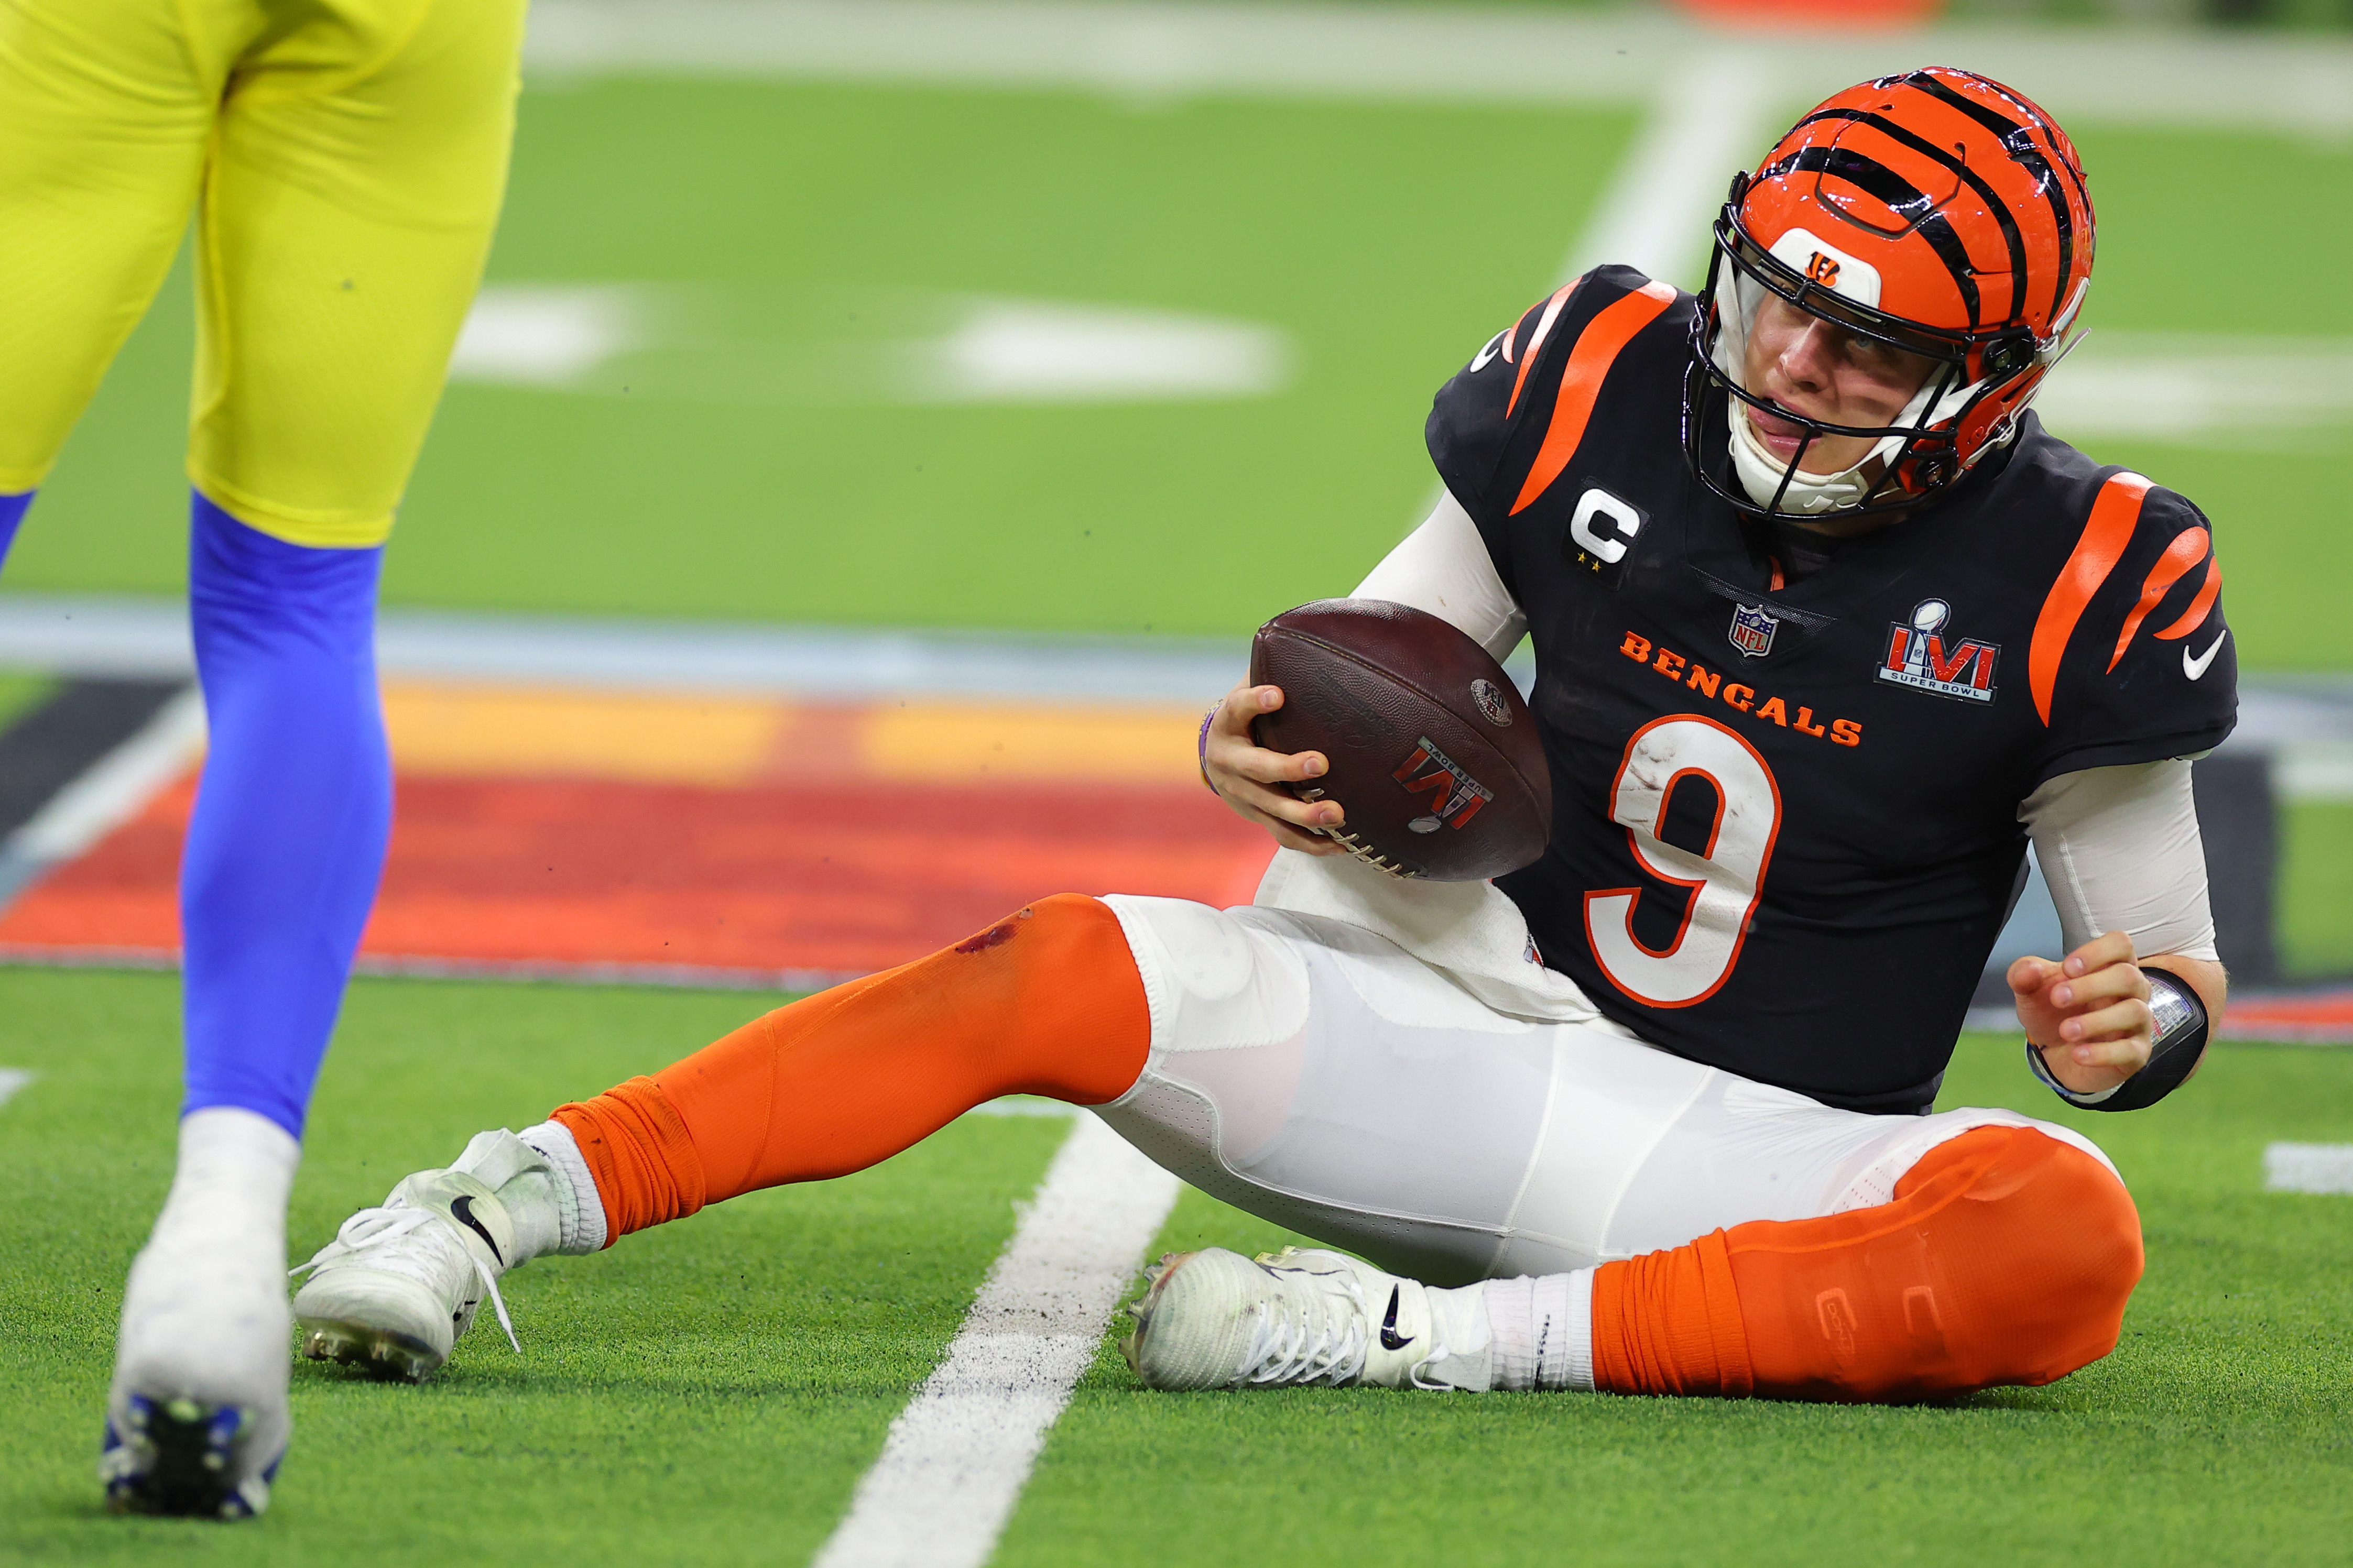 Joe Burrow #9 of the Cincinnati Bengals reacts in the fourth quarter during Super Bowl LVI against the Los Angeles Rams at SoFi Stadium on February 13, 2022 in Inglewood, California.